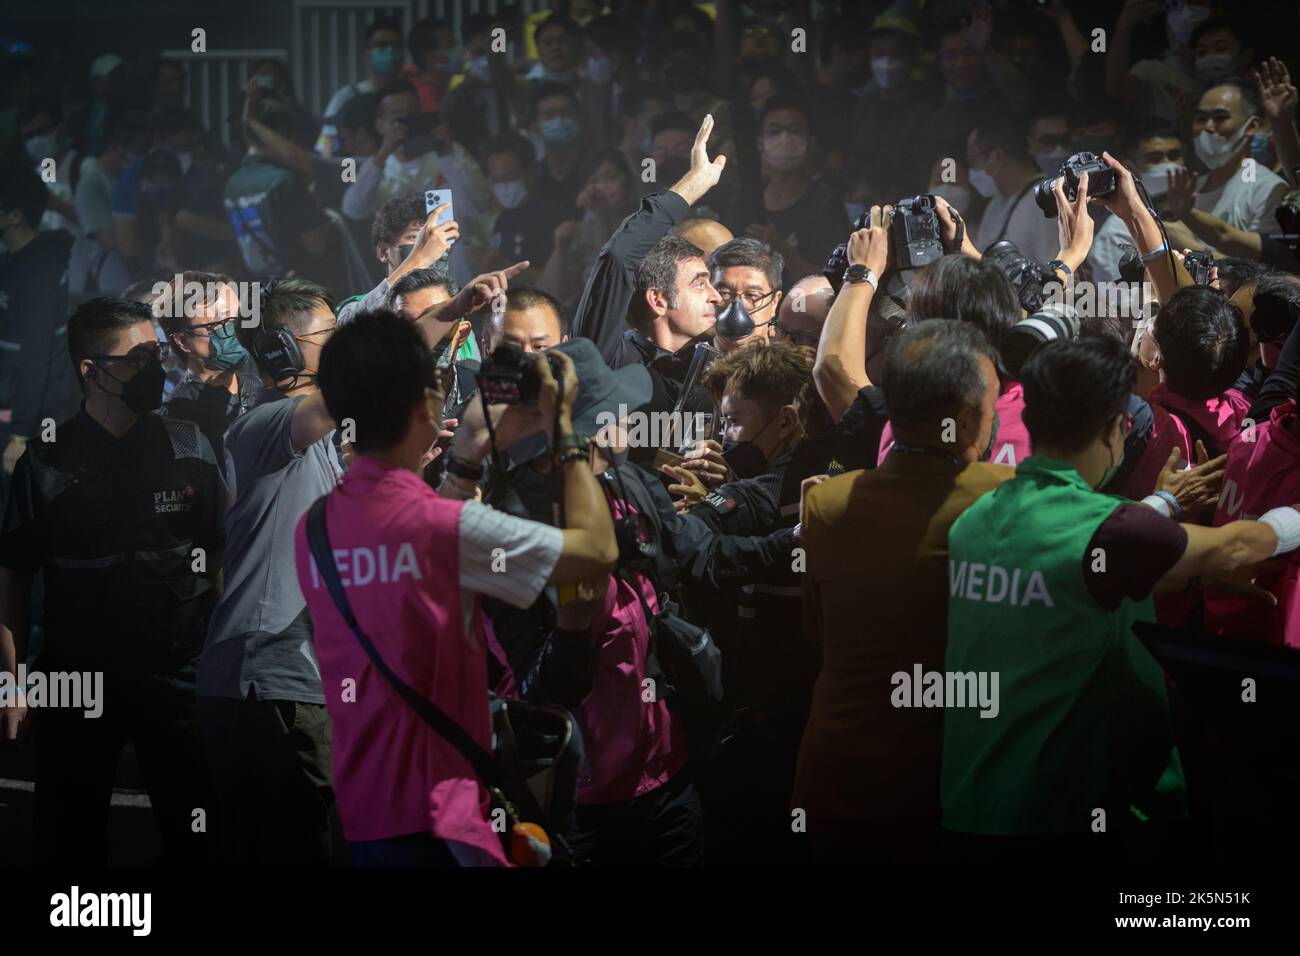 Hong Kong, China. 09th Oct, 2022. Ronnie O'Sullivan and Marco Fu. Ronnie O'Sullivan wins and is mobbed by fans and press.World No1 Ronnie O'Sullivan from England takes on local Hong Kong champion Marco Fu in the final of the Hong Kong Masters Snooker 2022. Alamy Live Sport/Jayne Russell Credit: Jayne Russell/Alamy Live News Stock Photo